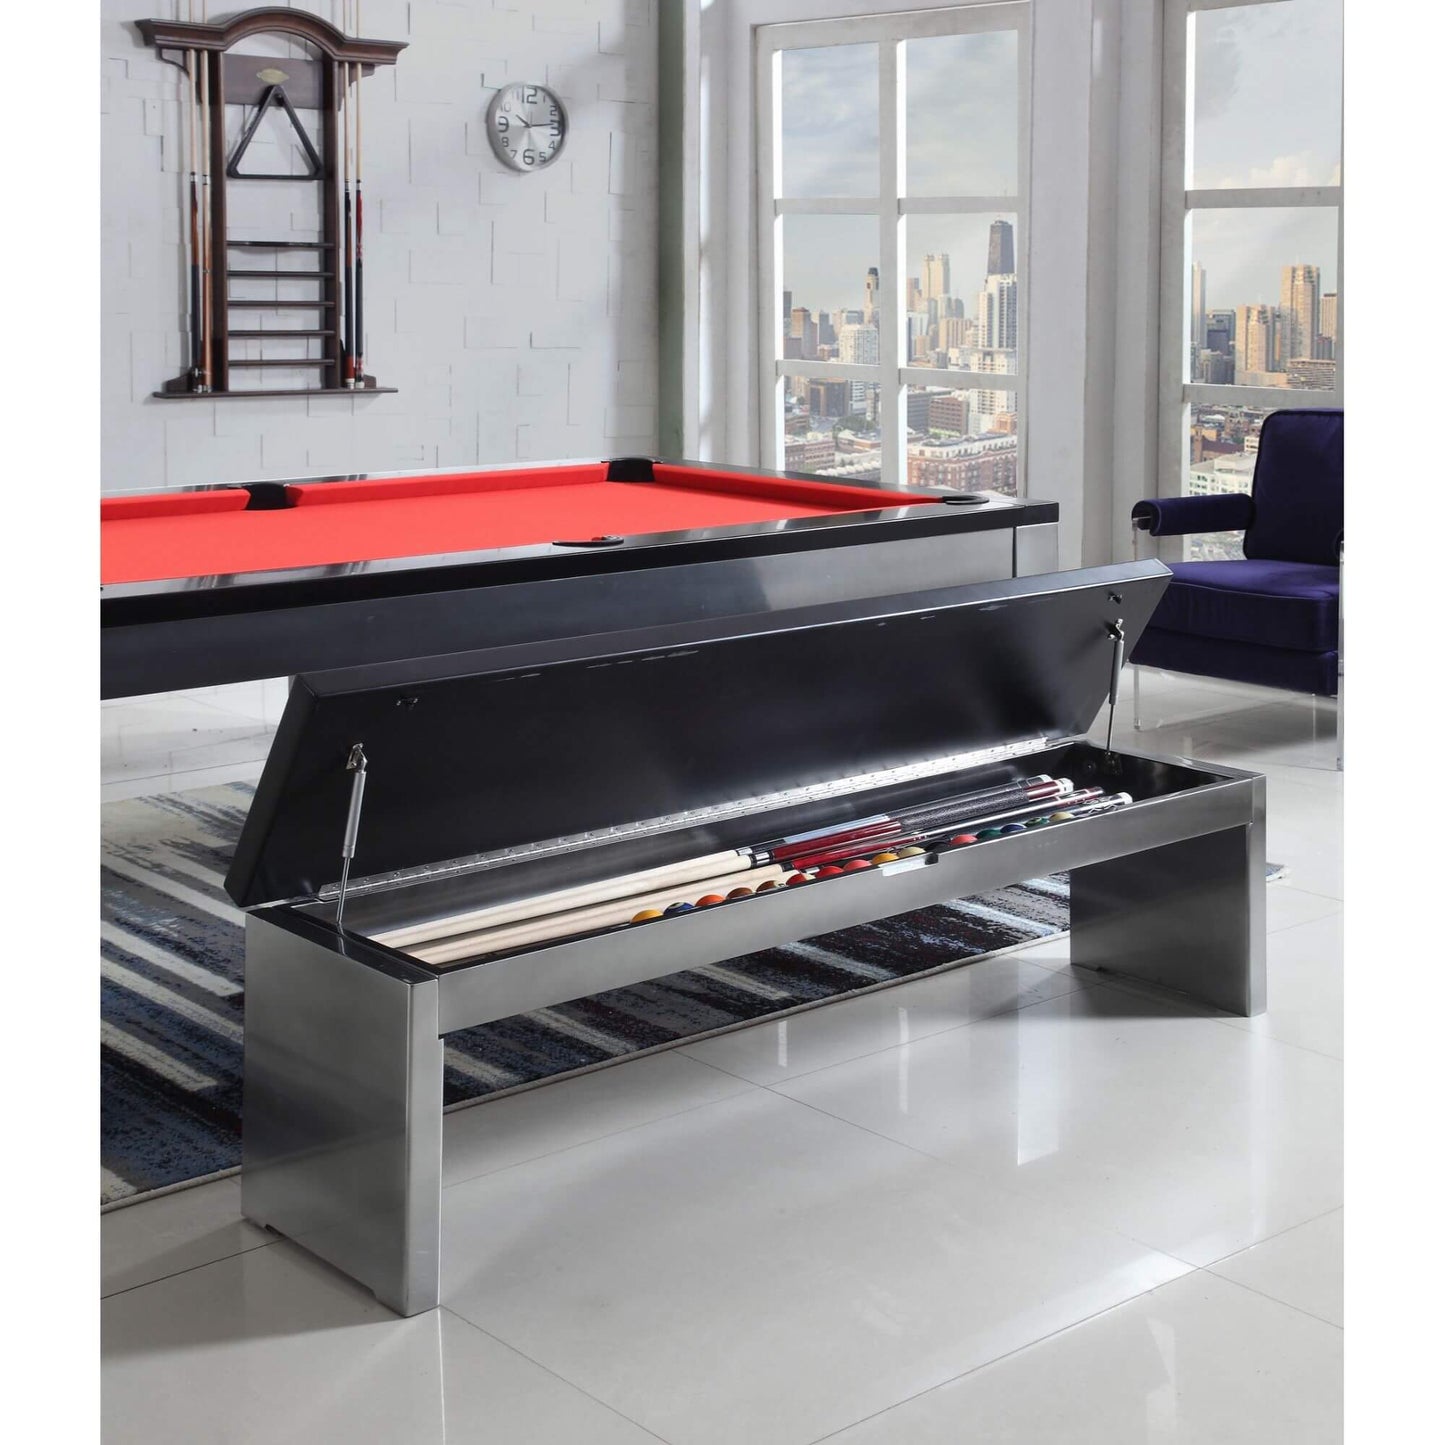 Playcraft Monaco Slate Pool Table with Dining Top - Upper Livin